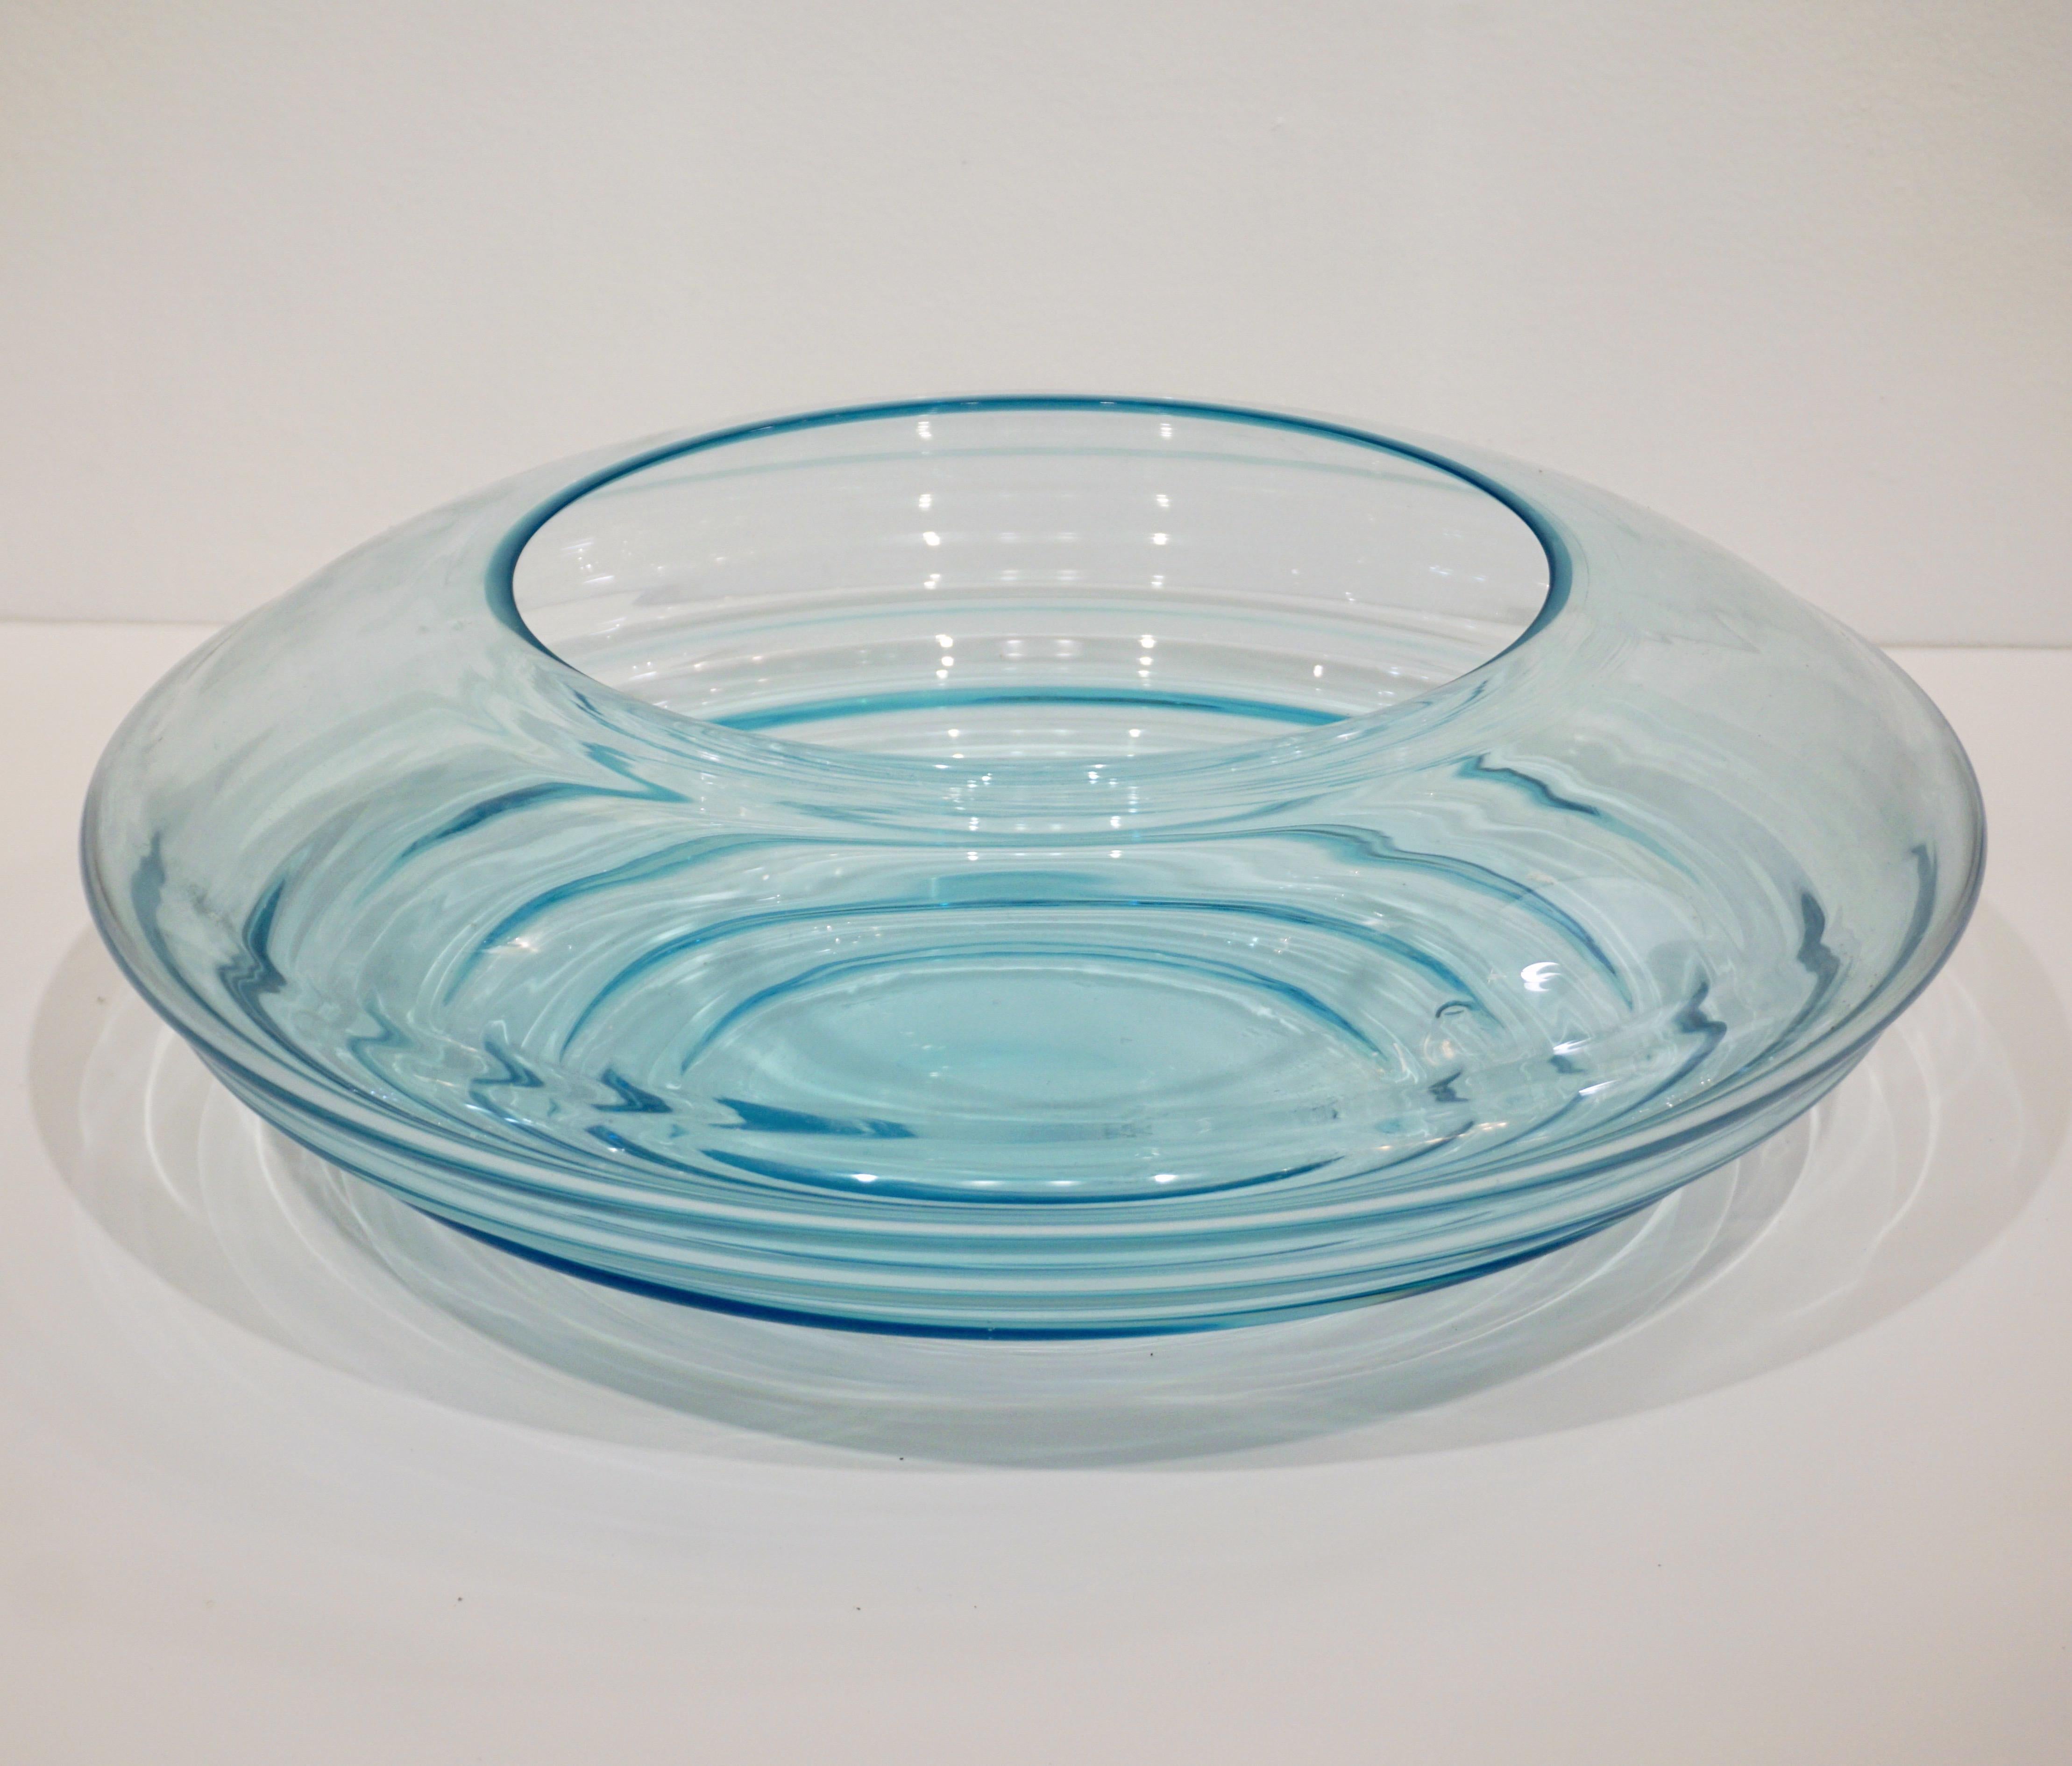 A signed Mid-Century Modern sensual curved centerpiece of great effect, blown in transparent crystal turquoise blue Murano glass, the ridges of the organic modern shape playing with the light create diverse intensities in color. High quality of